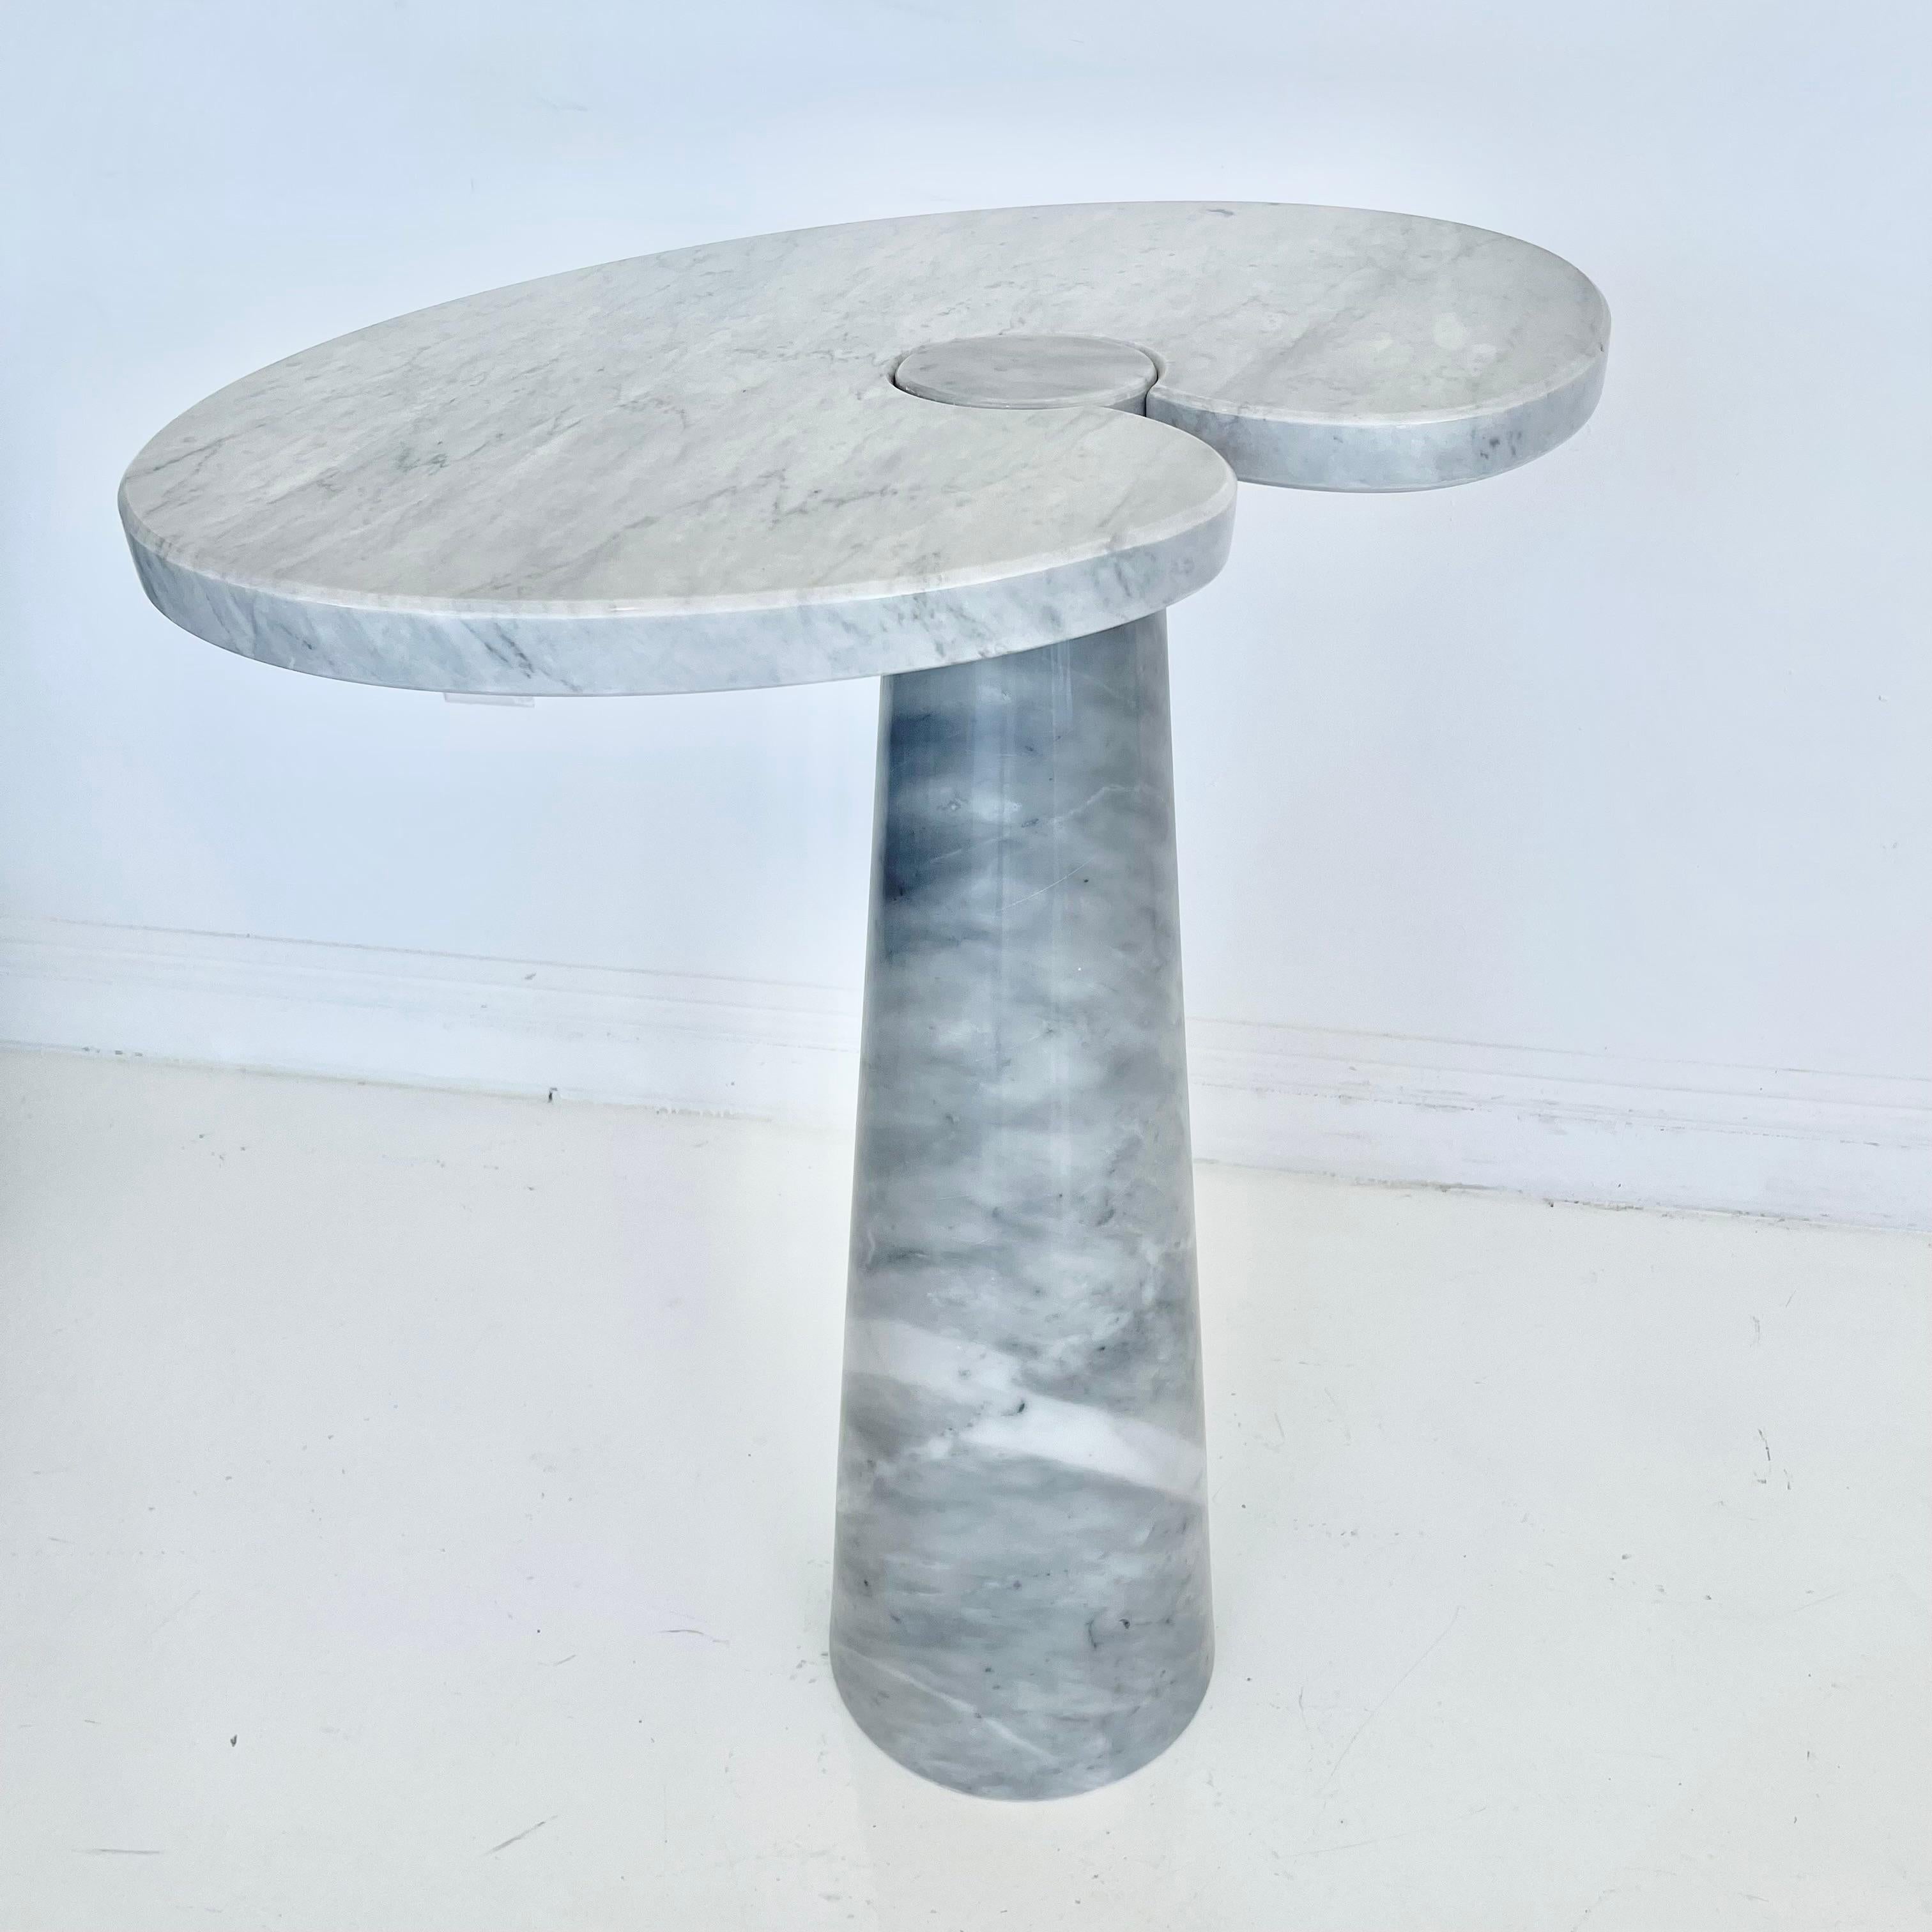 Stunning Carrara marble side table by Angelo Mangiarotti. Large cone shaped base holds a large water lily shaped slab of marble with a circular cut out that fits snugly around the top of base. Extremely heavy and well made. White and blue/grey veins